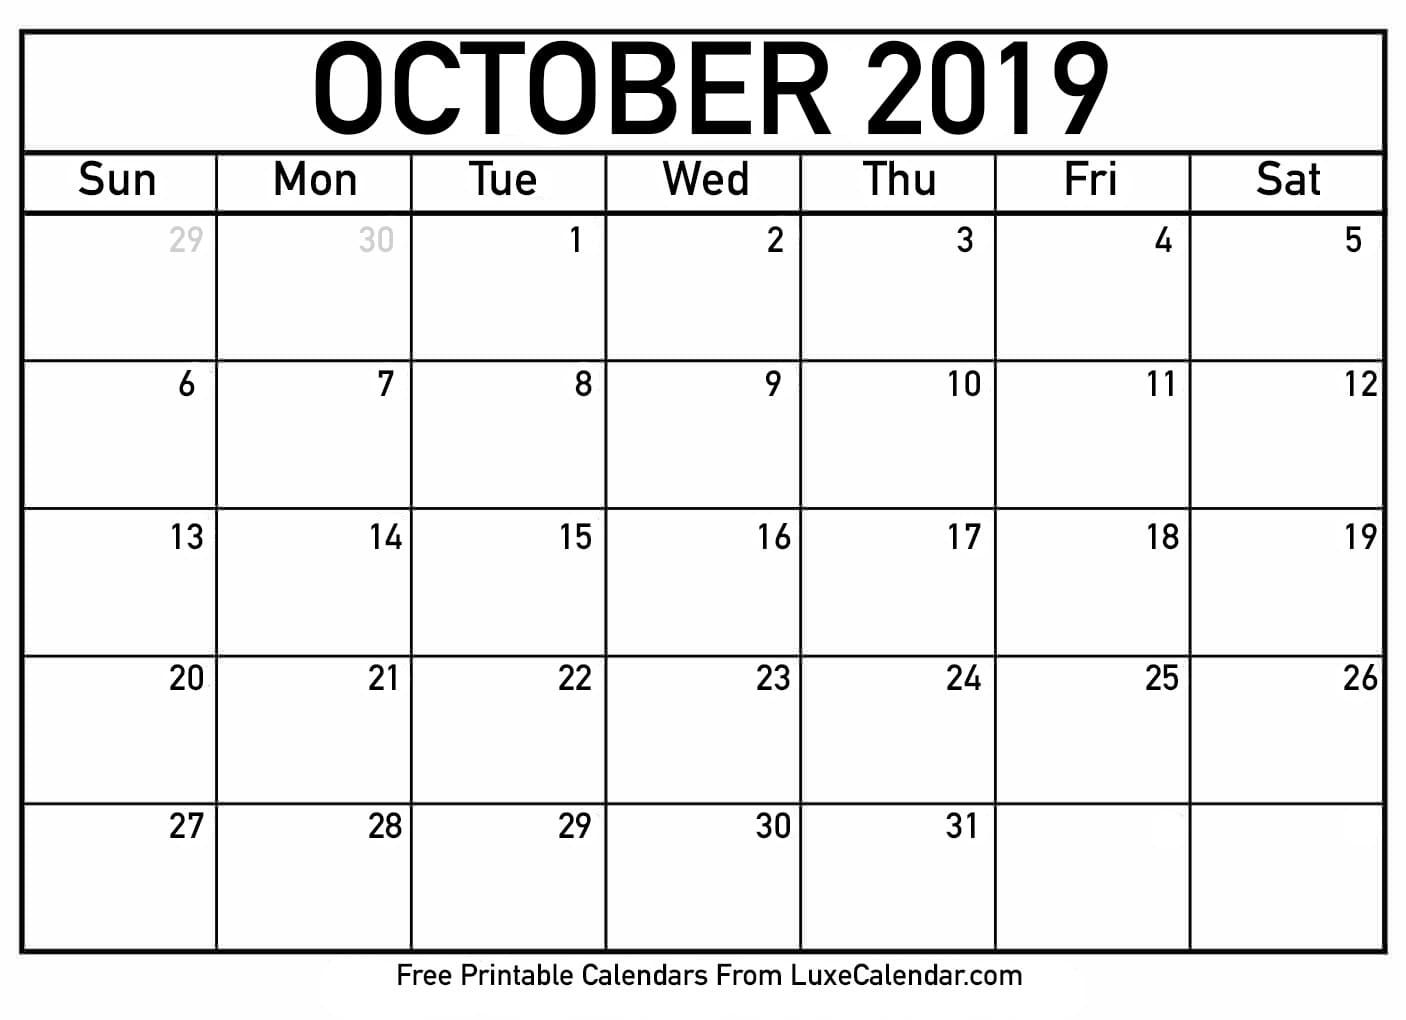 Print Free Calendars Without Downloading 2019 October